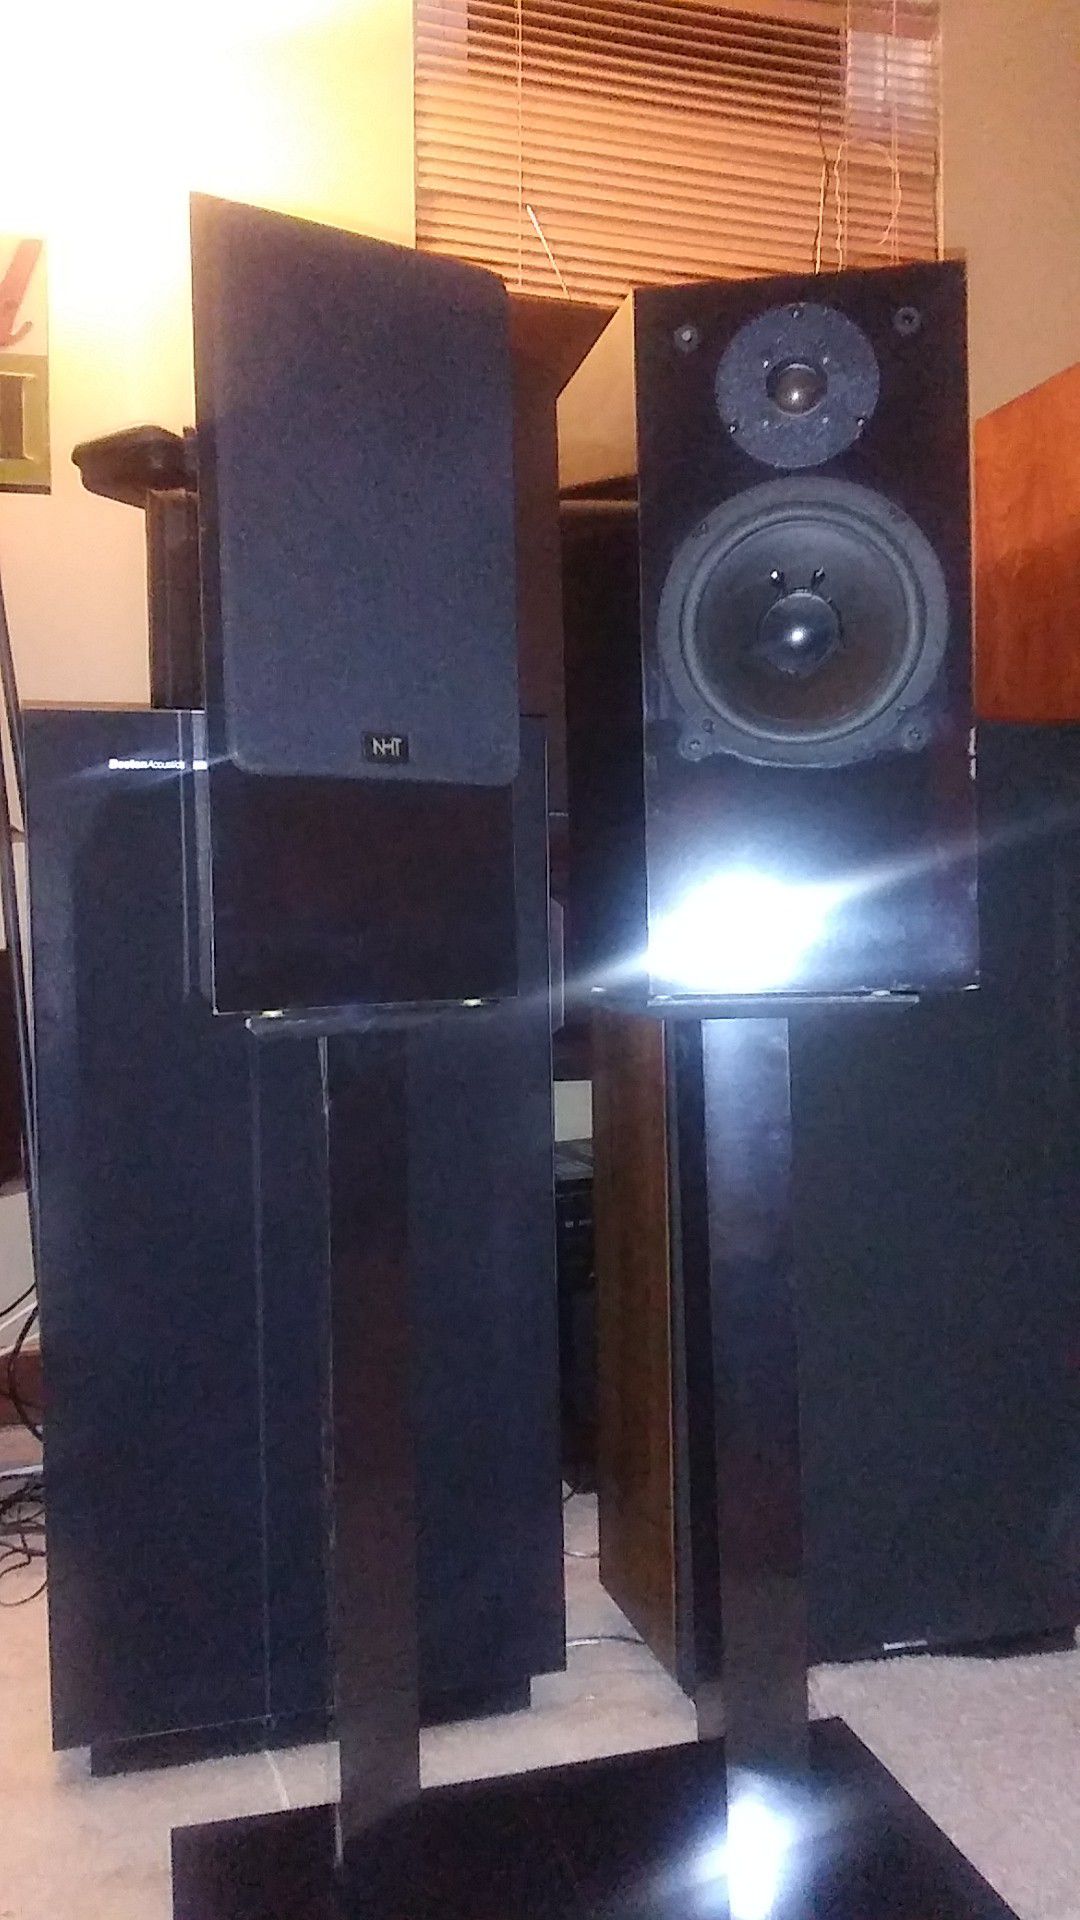 WAS $190 NEED TO SELL TODAY. ( SALE PENDING) NHT (NOW HEAR THIS)model 1.3 150 watts selling with original speaker stands